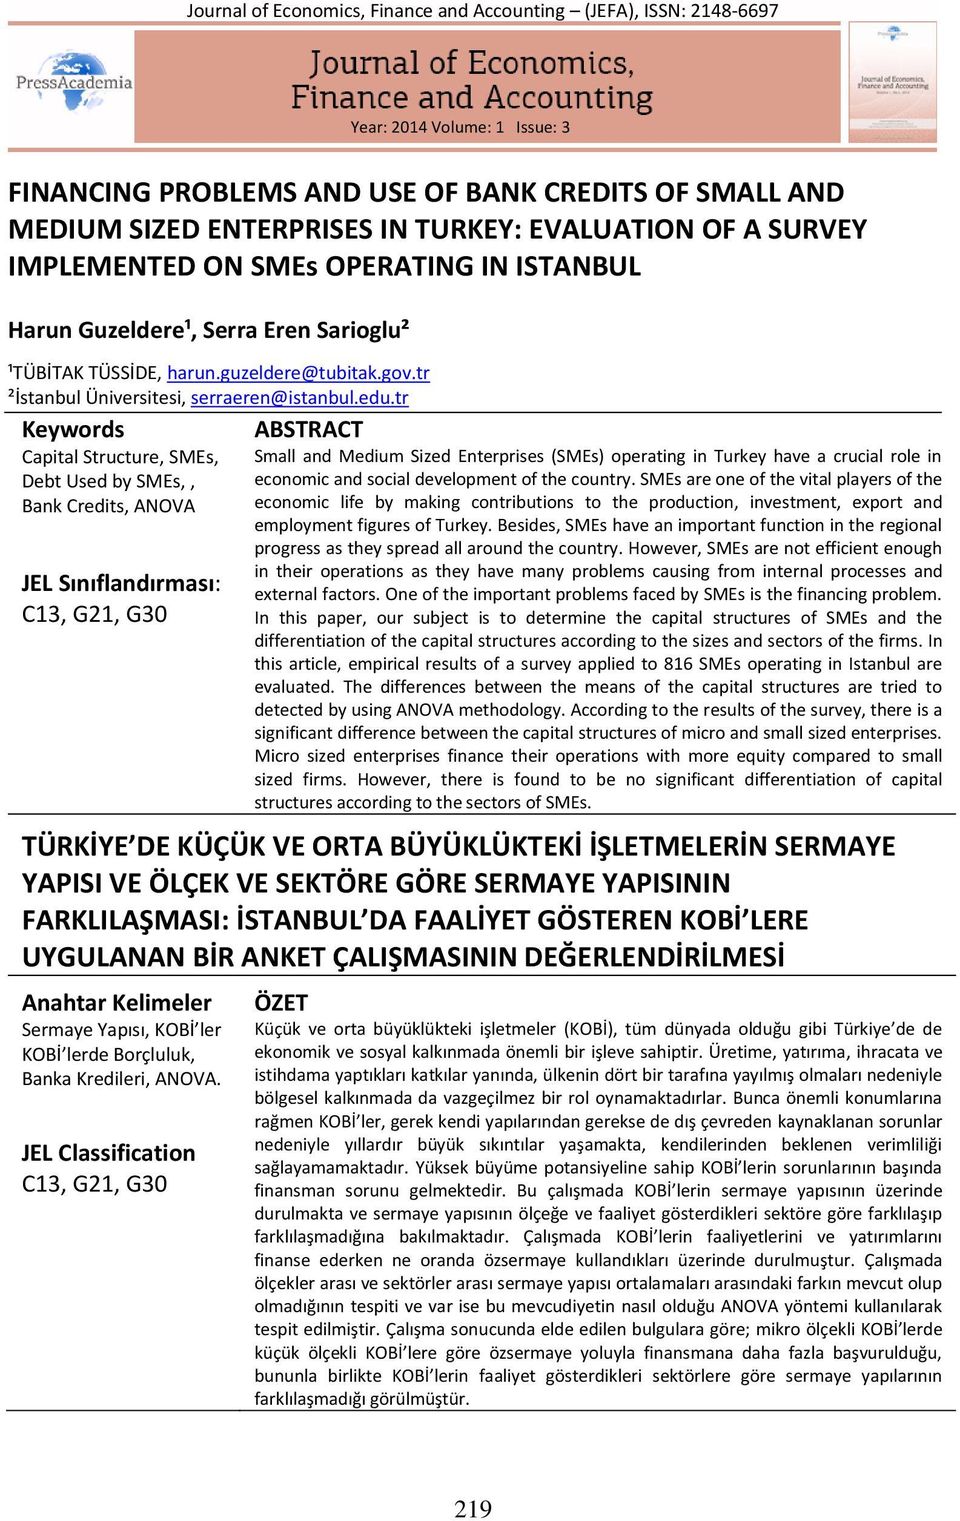 tr Keywords Capital Structure, SMEs, Debt Used by SMEs,, Bank Credits, ANOVA JEL Sınıflandırması: C13, G21, G30 ABSTRACT Small and Medium Sized Enterprises (SMEs) operating in Turkey have a crucial